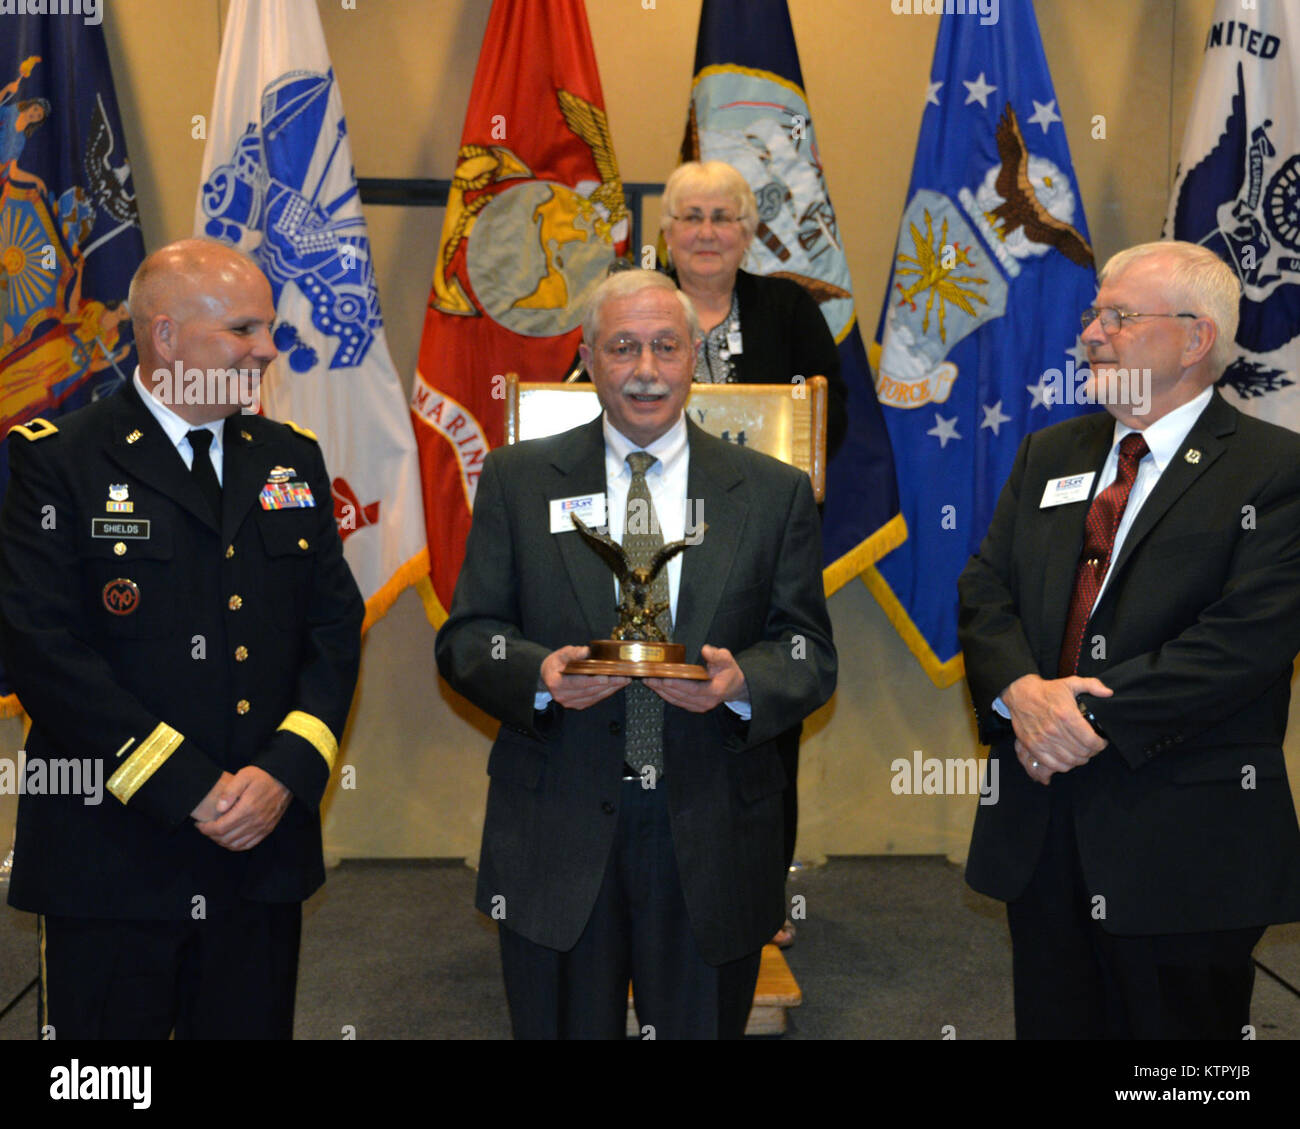 New York Army National Guard Commander Brig. Gen. Raymond Shields and New York State Employer Support of the Guard and Reserve Chairman Maj. Gen. (Ret.) Dennis Lutz present the ESGR’s Spirit of ESGR Award to Paul Geiss (center), a volunteer from central New York during the ESGR 2016 Awards Banquet in Albany, Apr. 26.  The Spirit of ESGR Award is presented to a volunteer who exemplifies the program and who has displayed the highest level of volunteer service. (U.S. Army National Guard photo by: Sgt. Major Corine Lombardo/RELEASED) Stock Photo